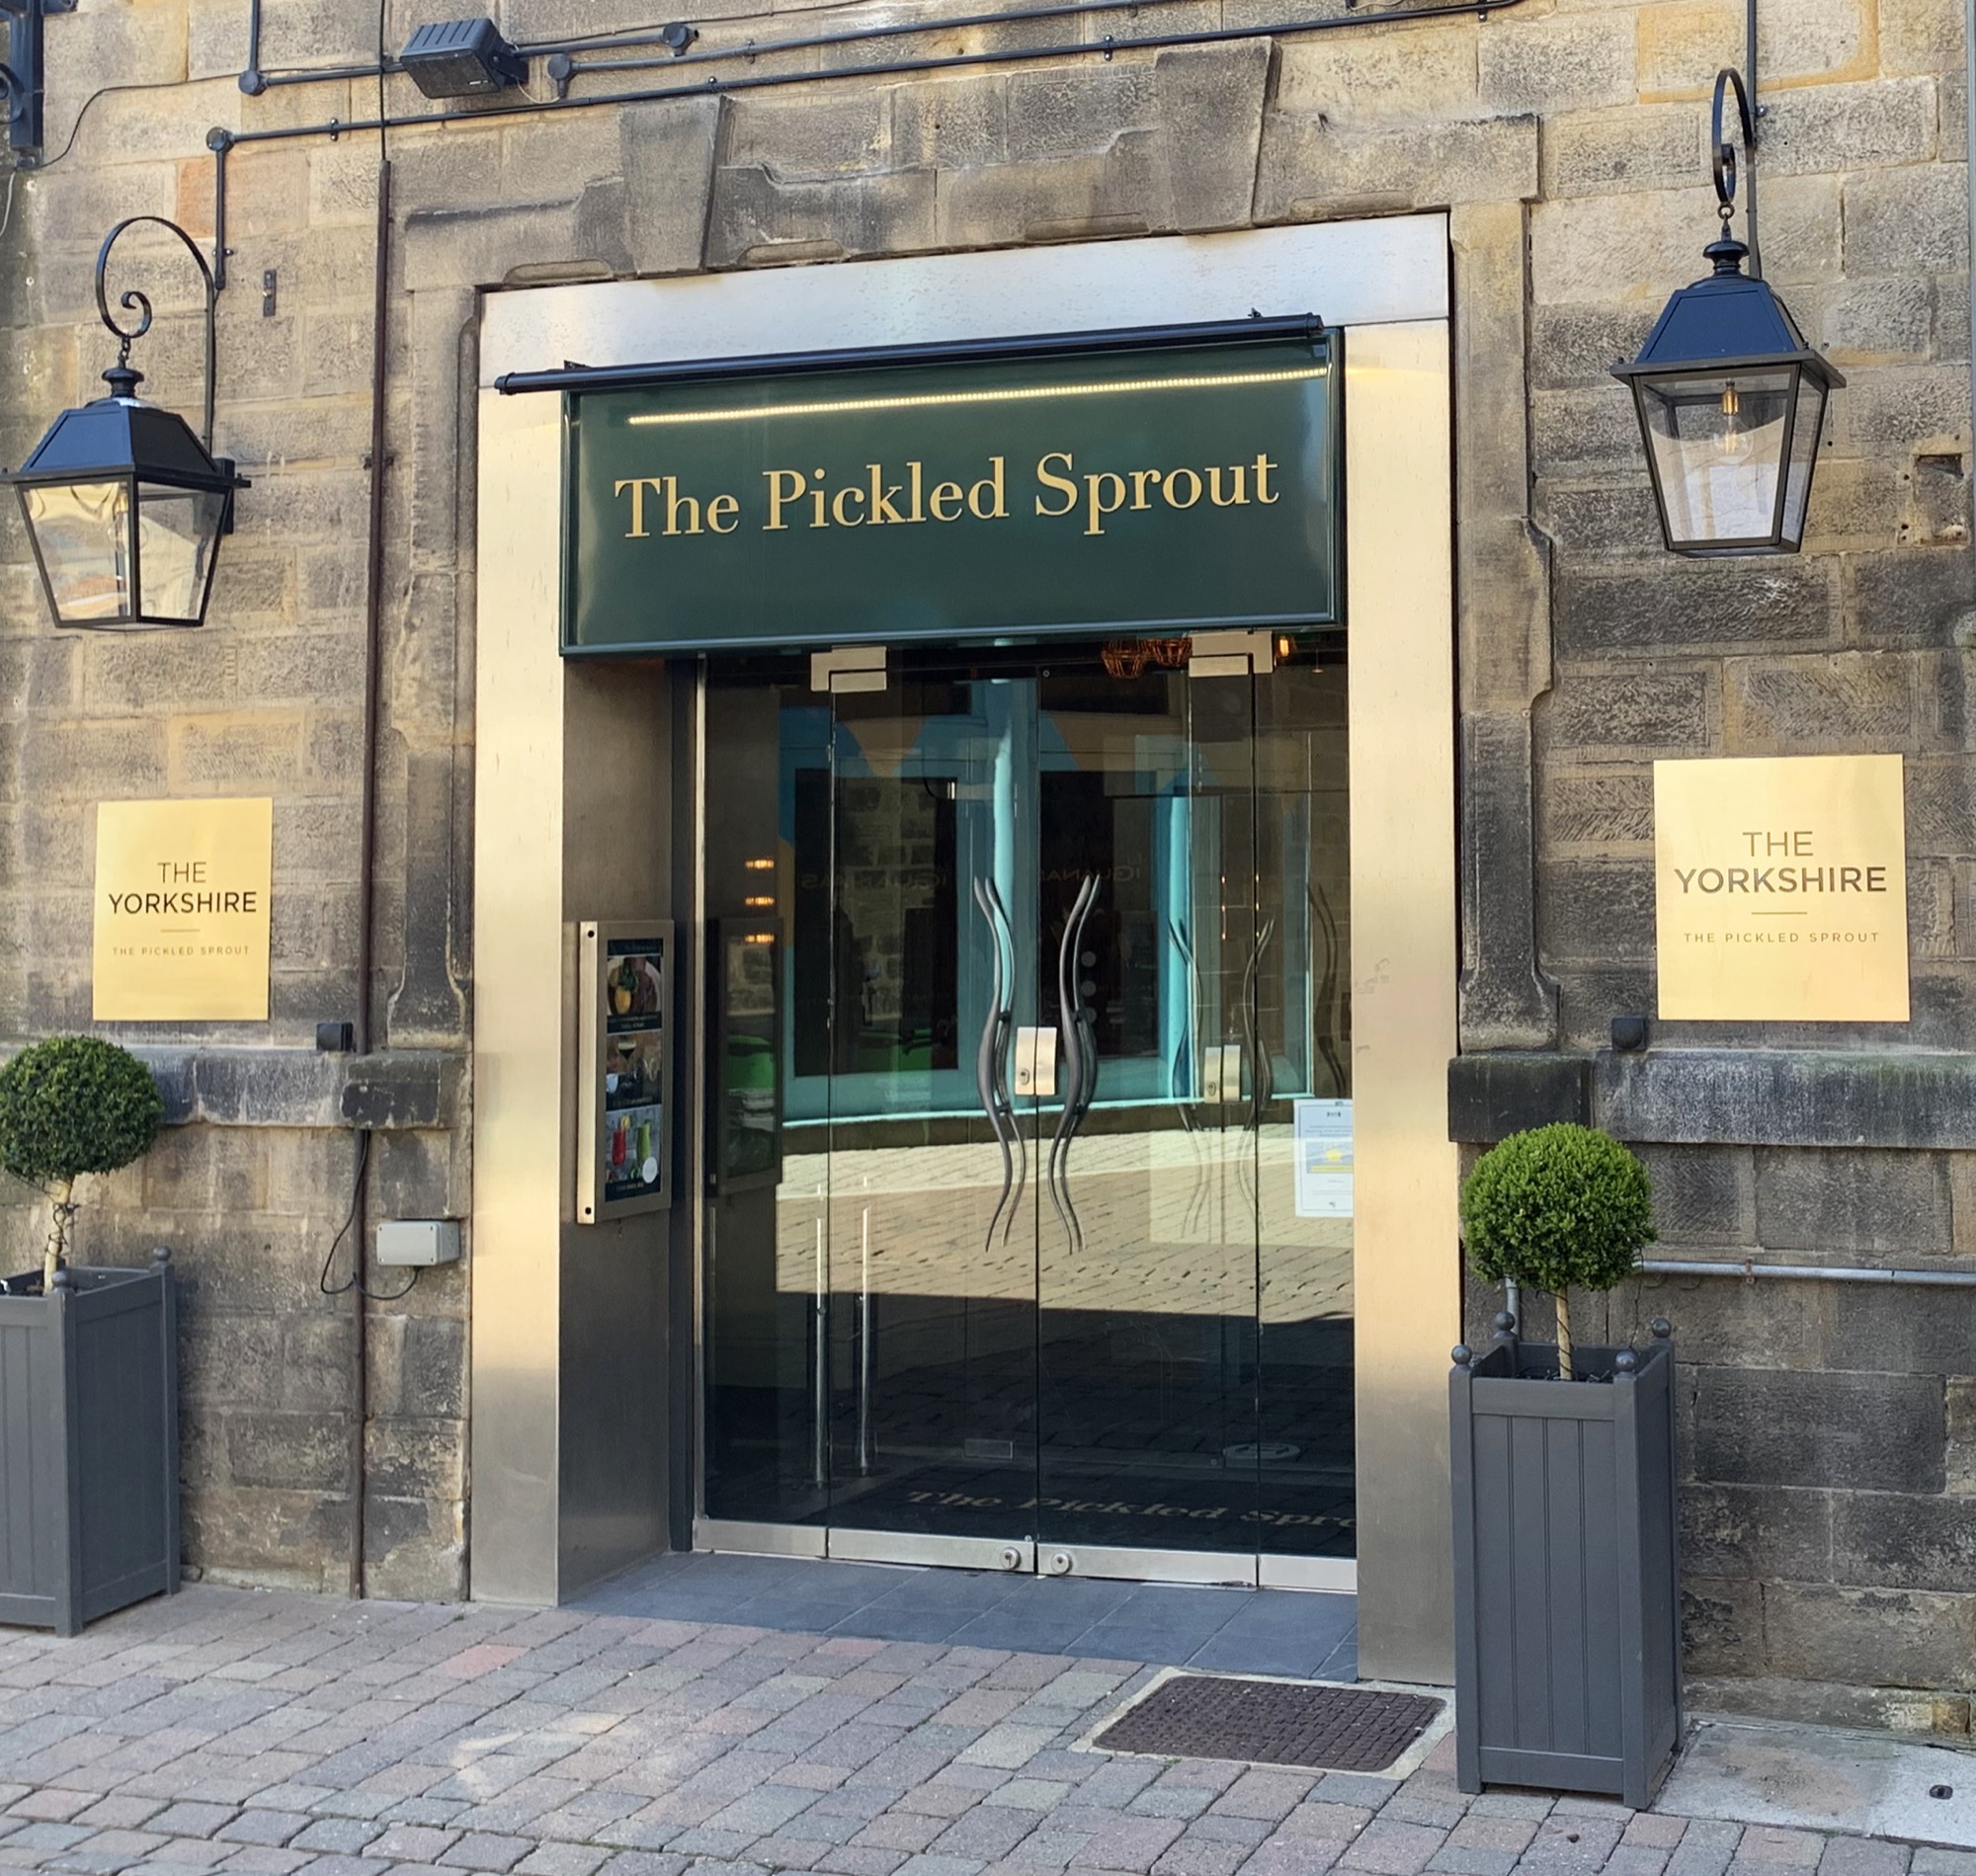 The Yorkshire's Pickled Sprout entrance signage